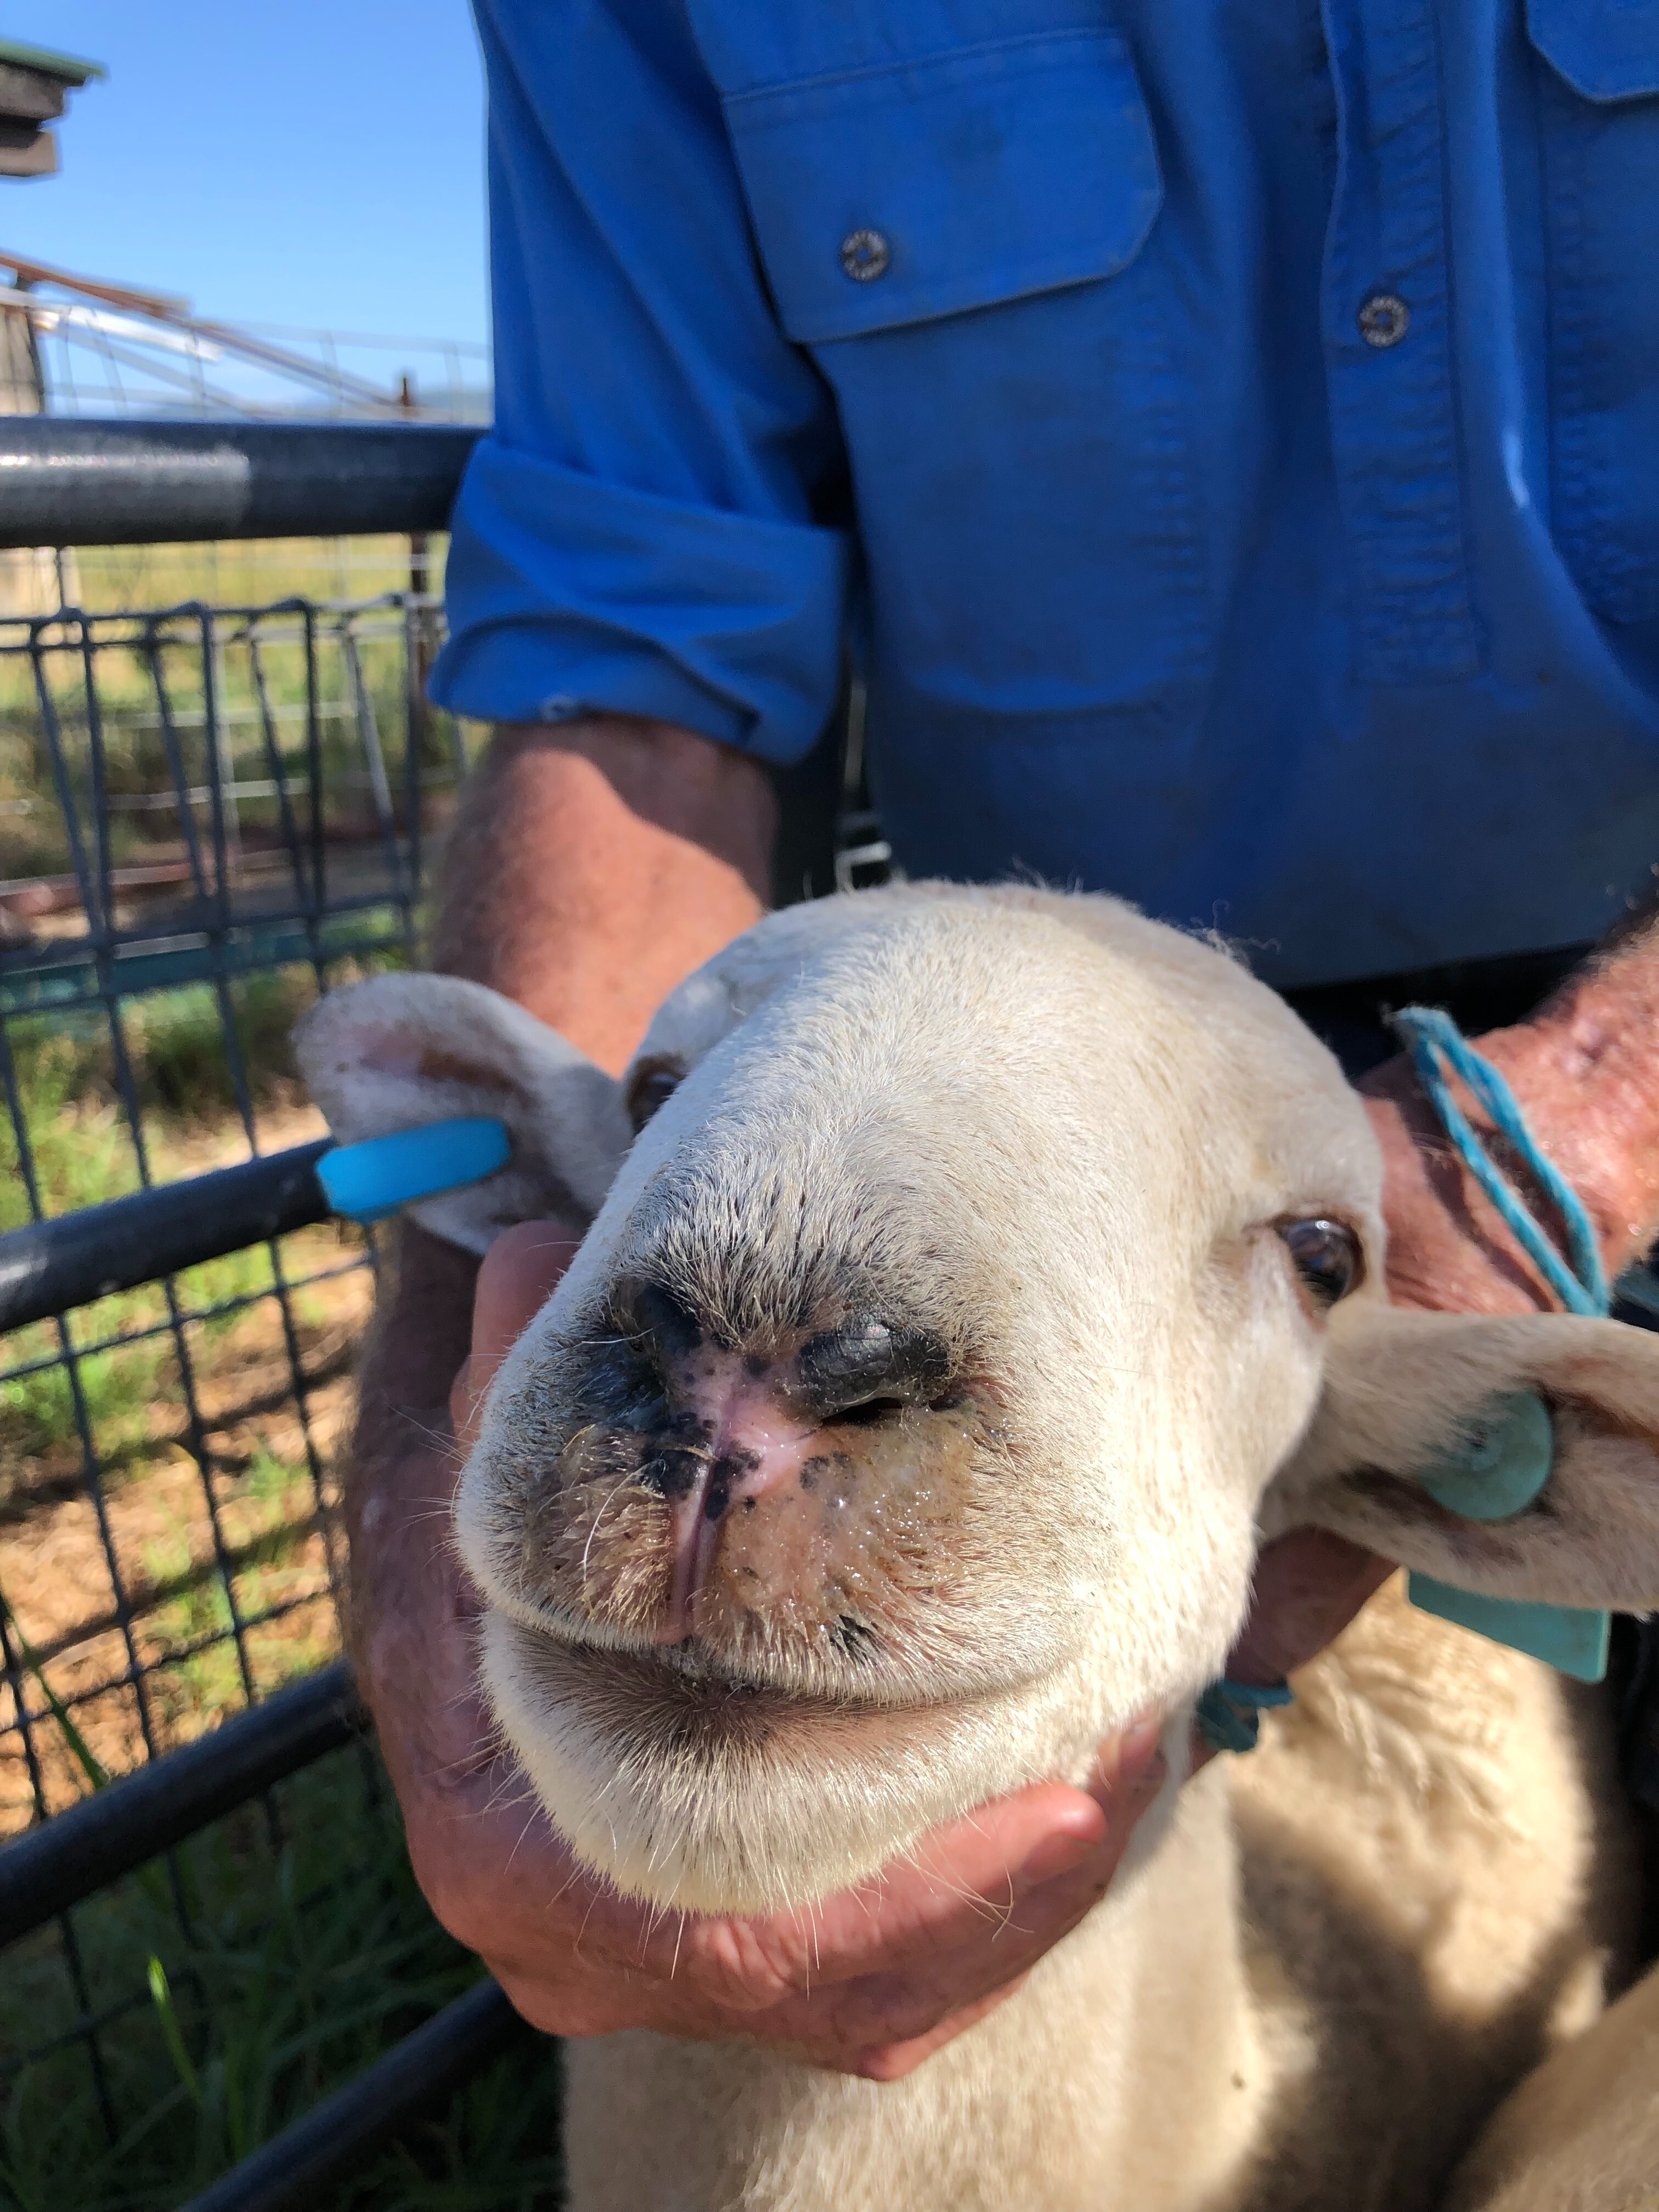 BTV face swelling in sheep